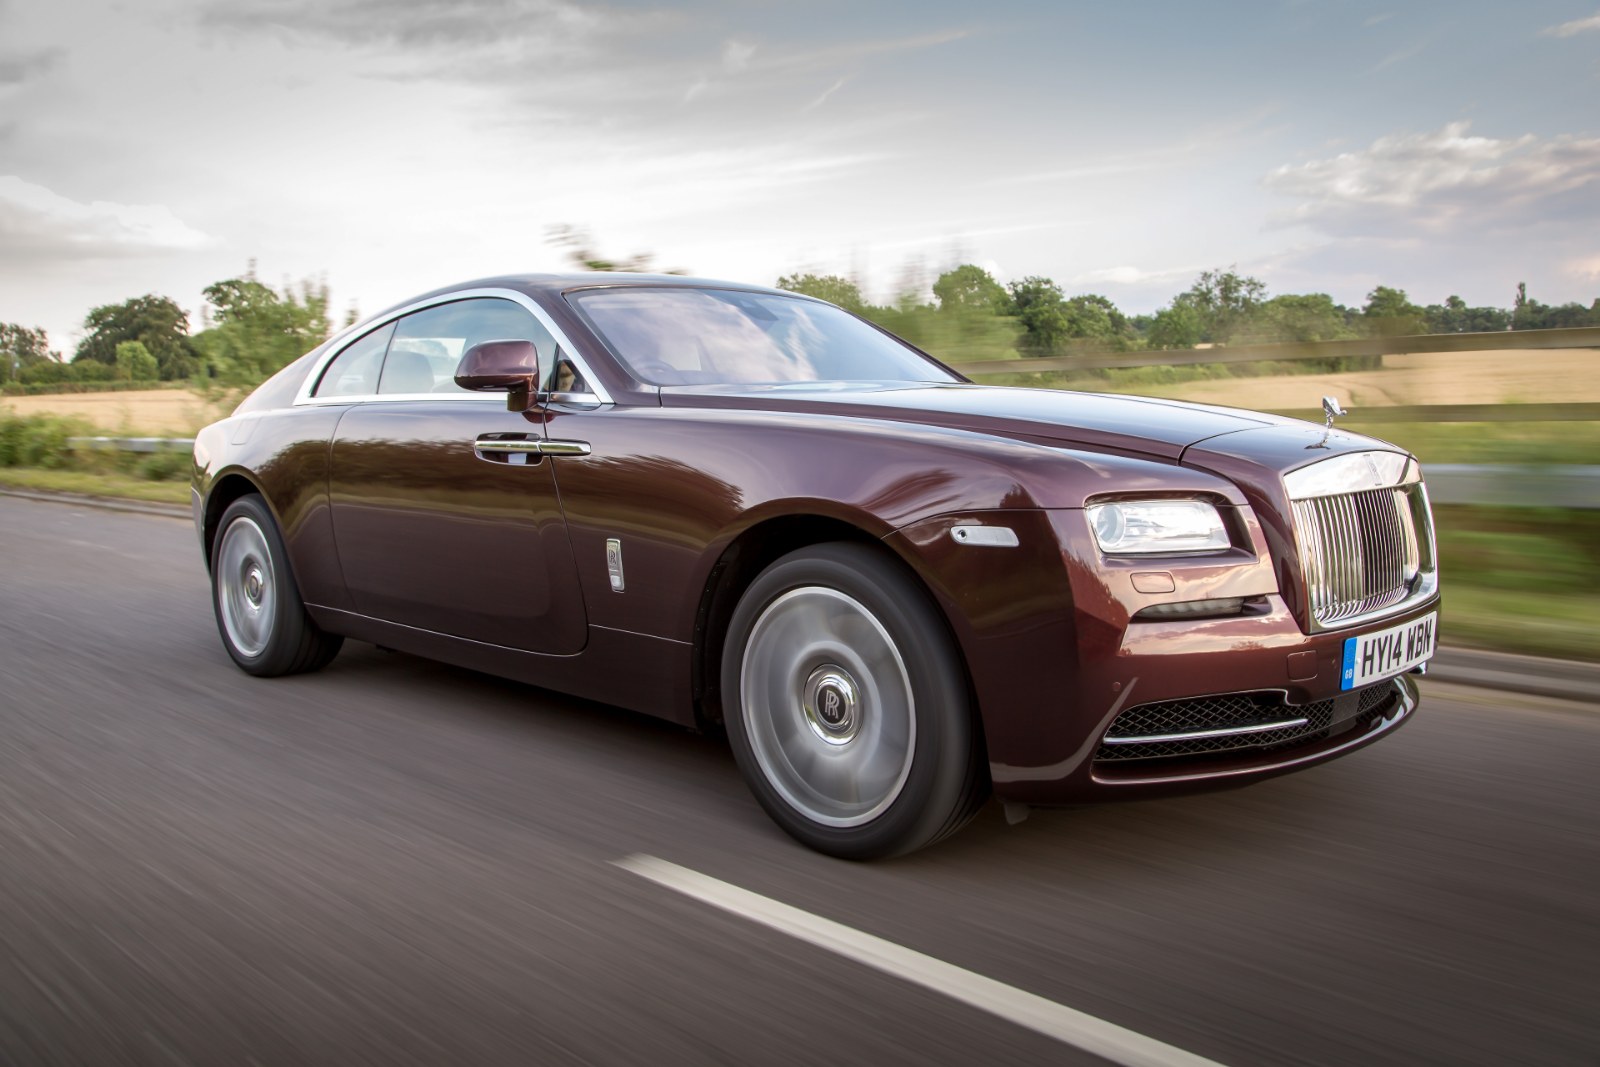 How much is an oil change for a rolls royce How Much Does A Rolls Royce Cost In Dubai